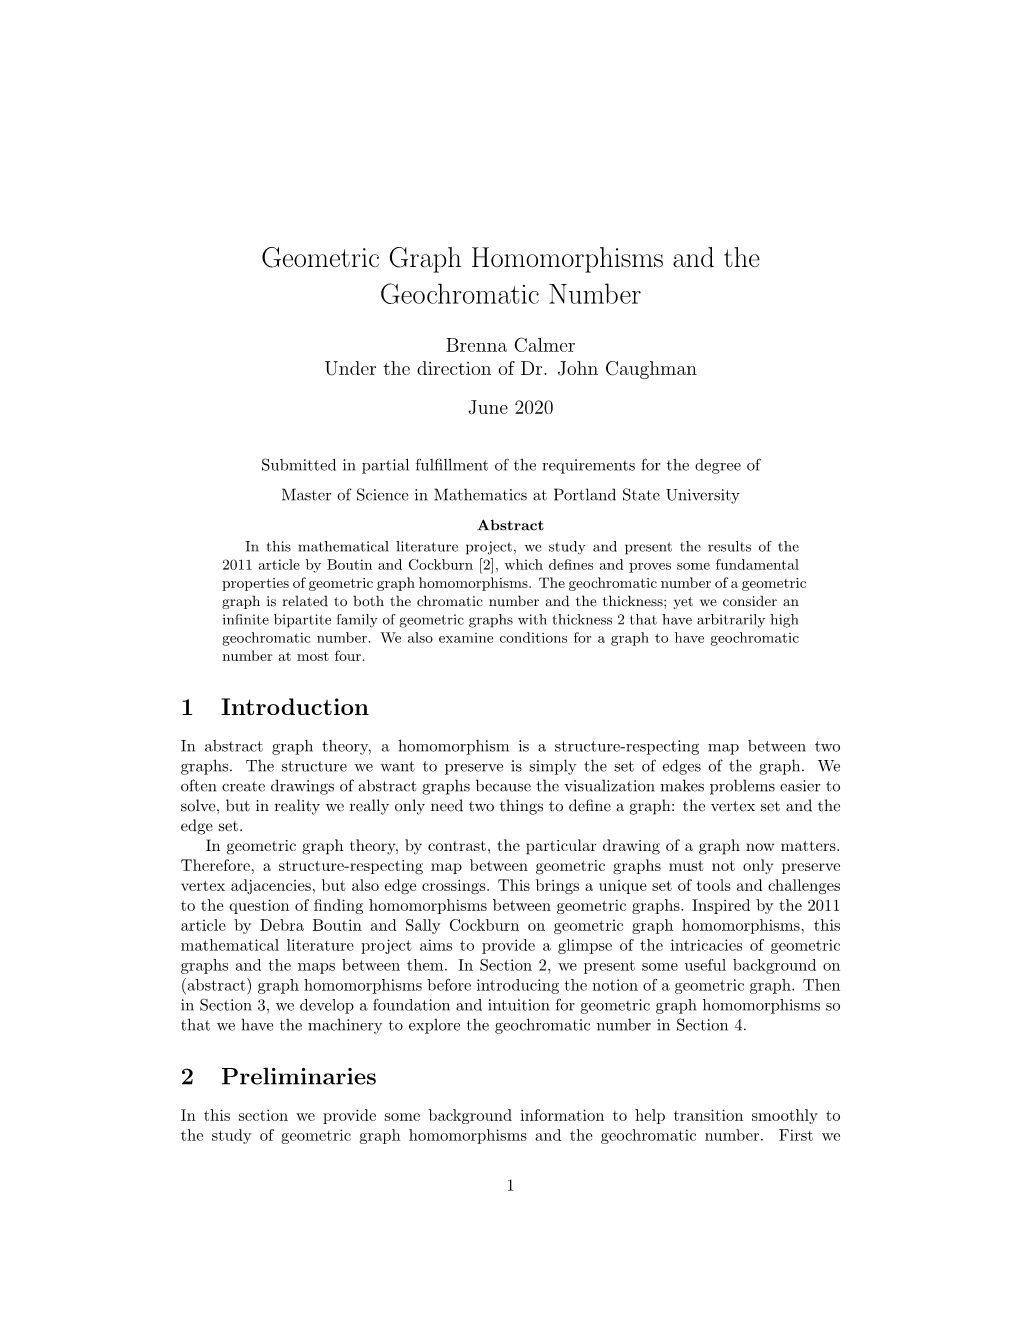 Geometric Graph Homomorphisms and the Geochromatic Number